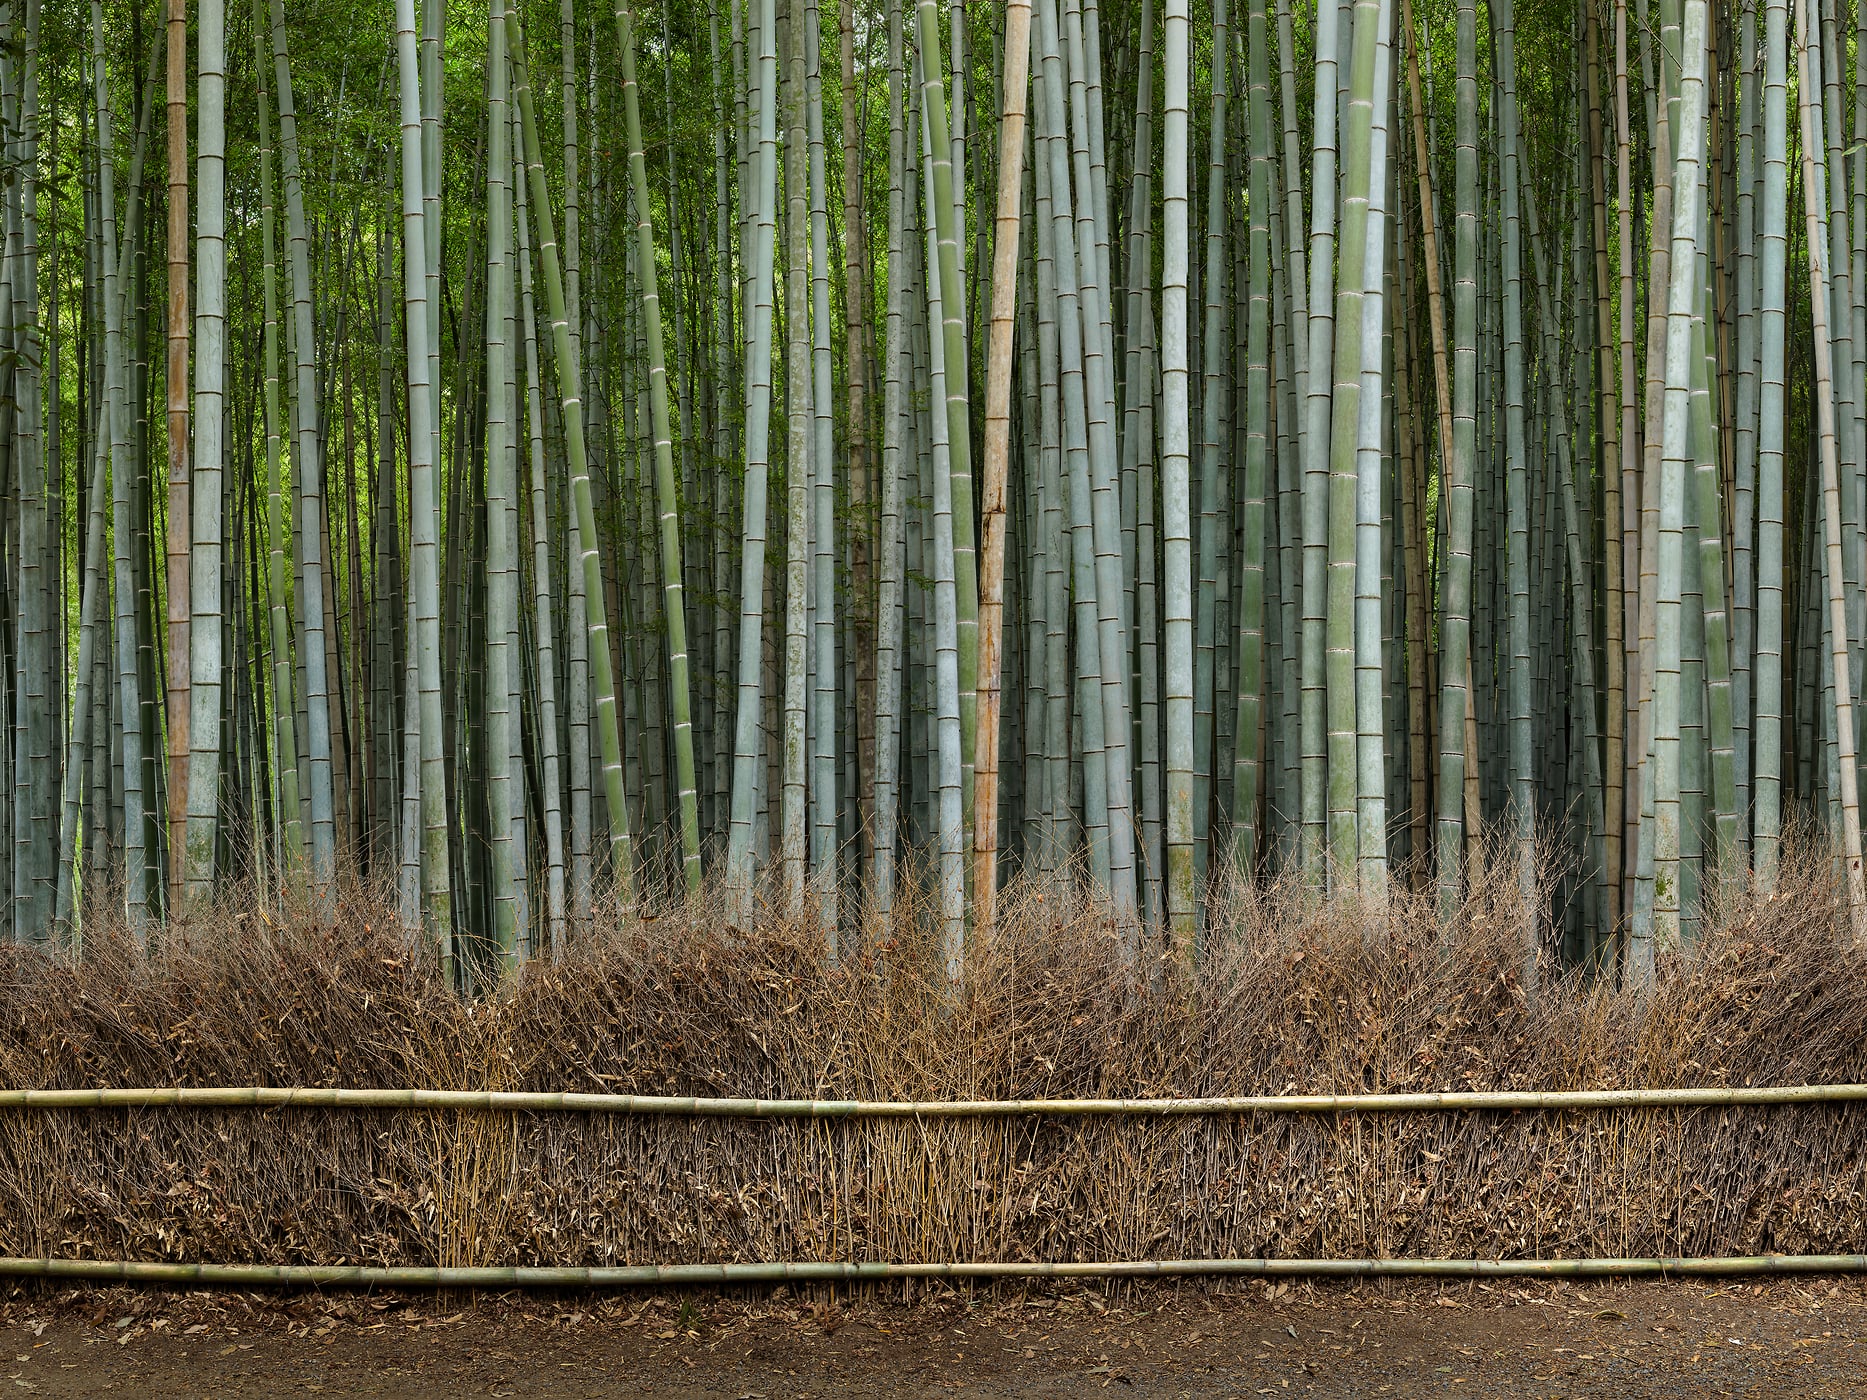 795 megapixels! A very high resolution, large-format VAST photo art print of a bamboo forest; nature photograph created by Scott Dimond in the Arashiyama Bamboo Grove in Ukyo Ward, Kyoto, Japan